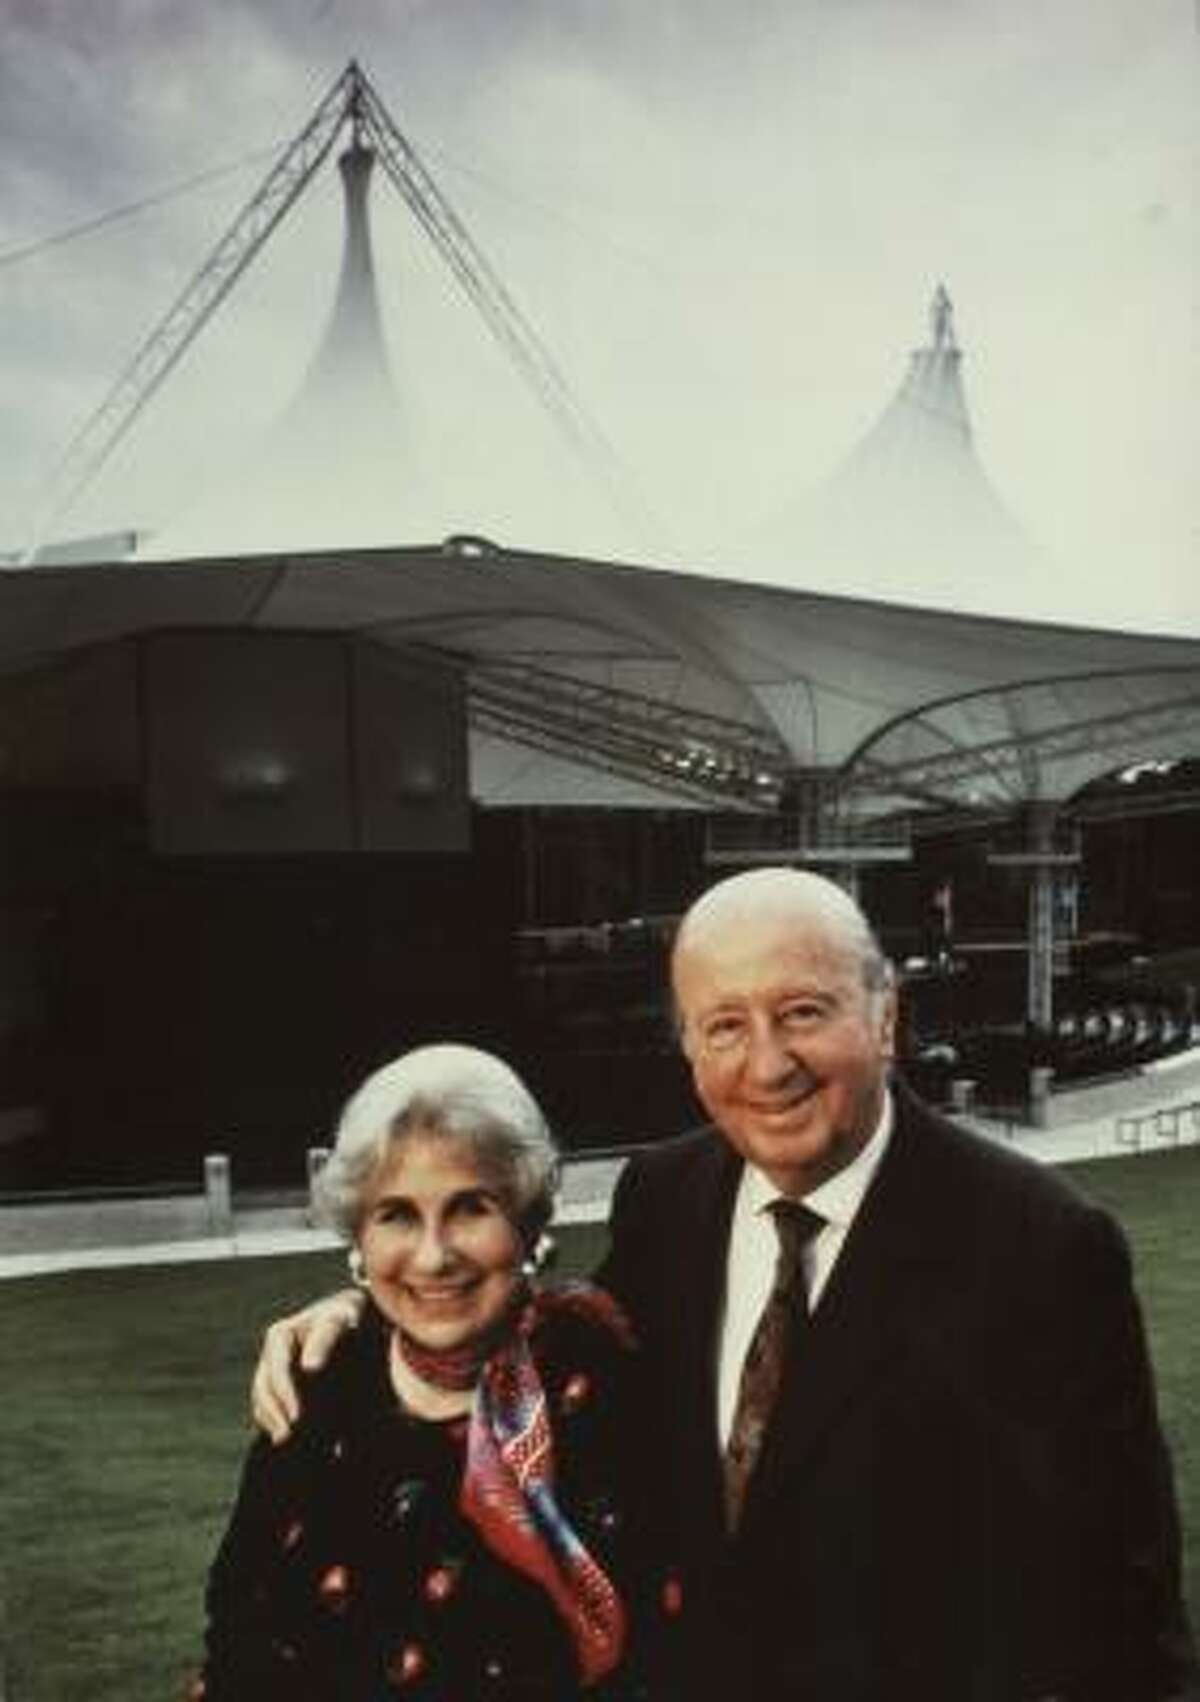 George and Cynthia Mitchell are shown at the opening of the Pavilion in 1990.